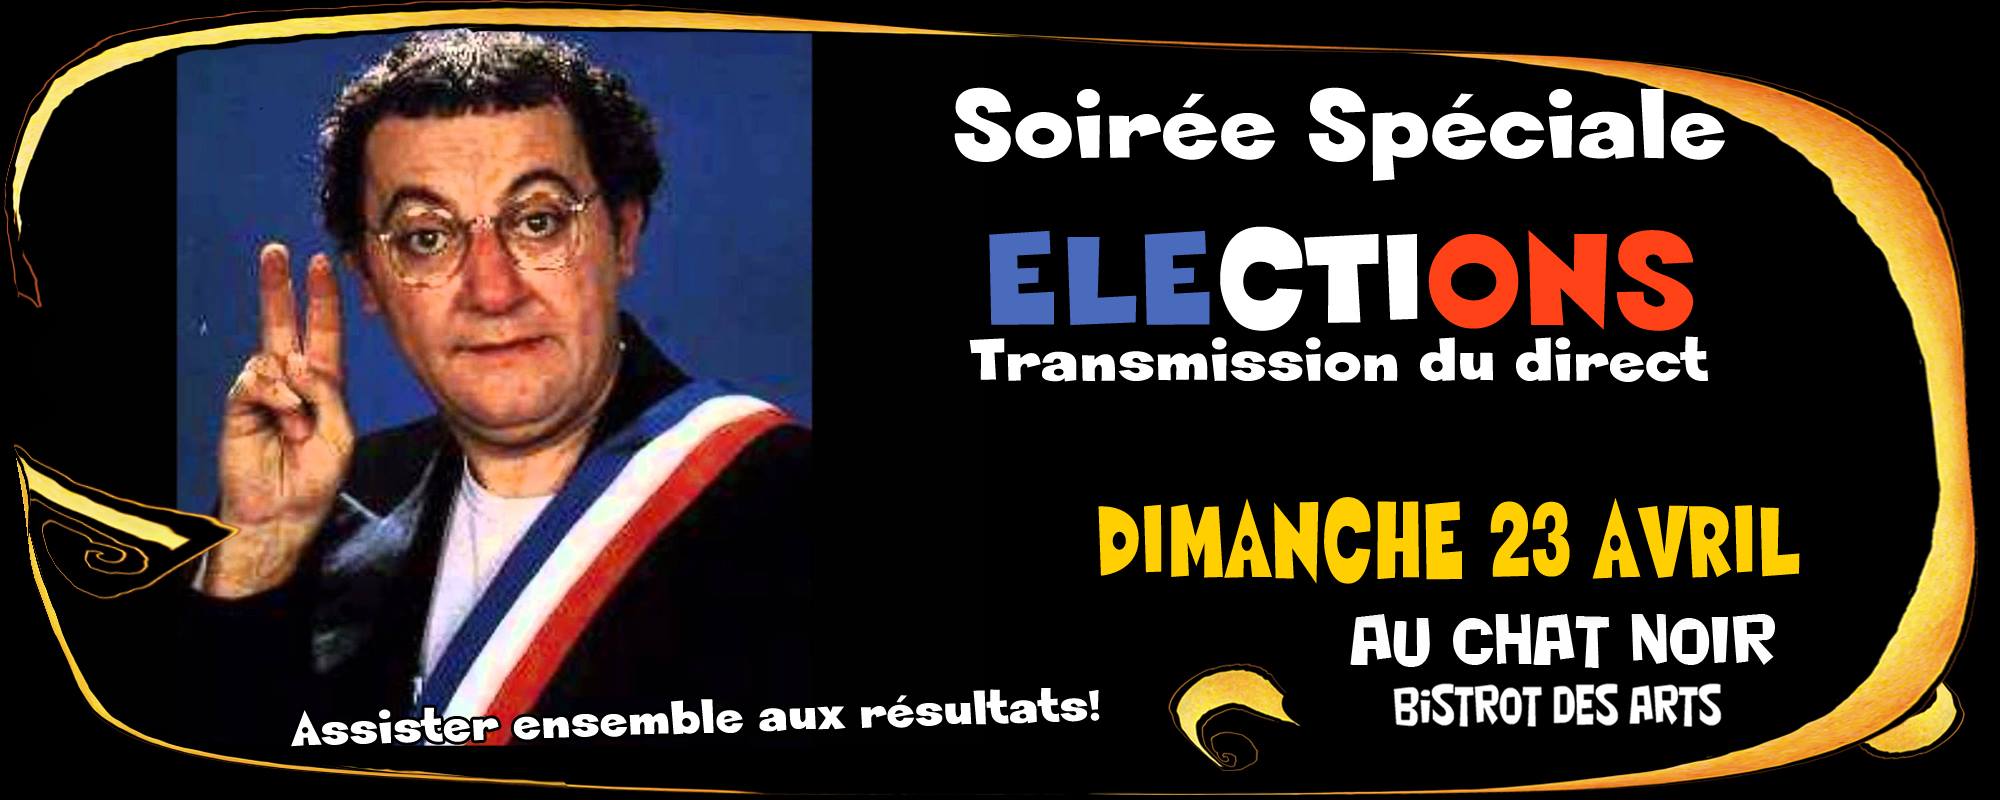 soiree elections chat noir